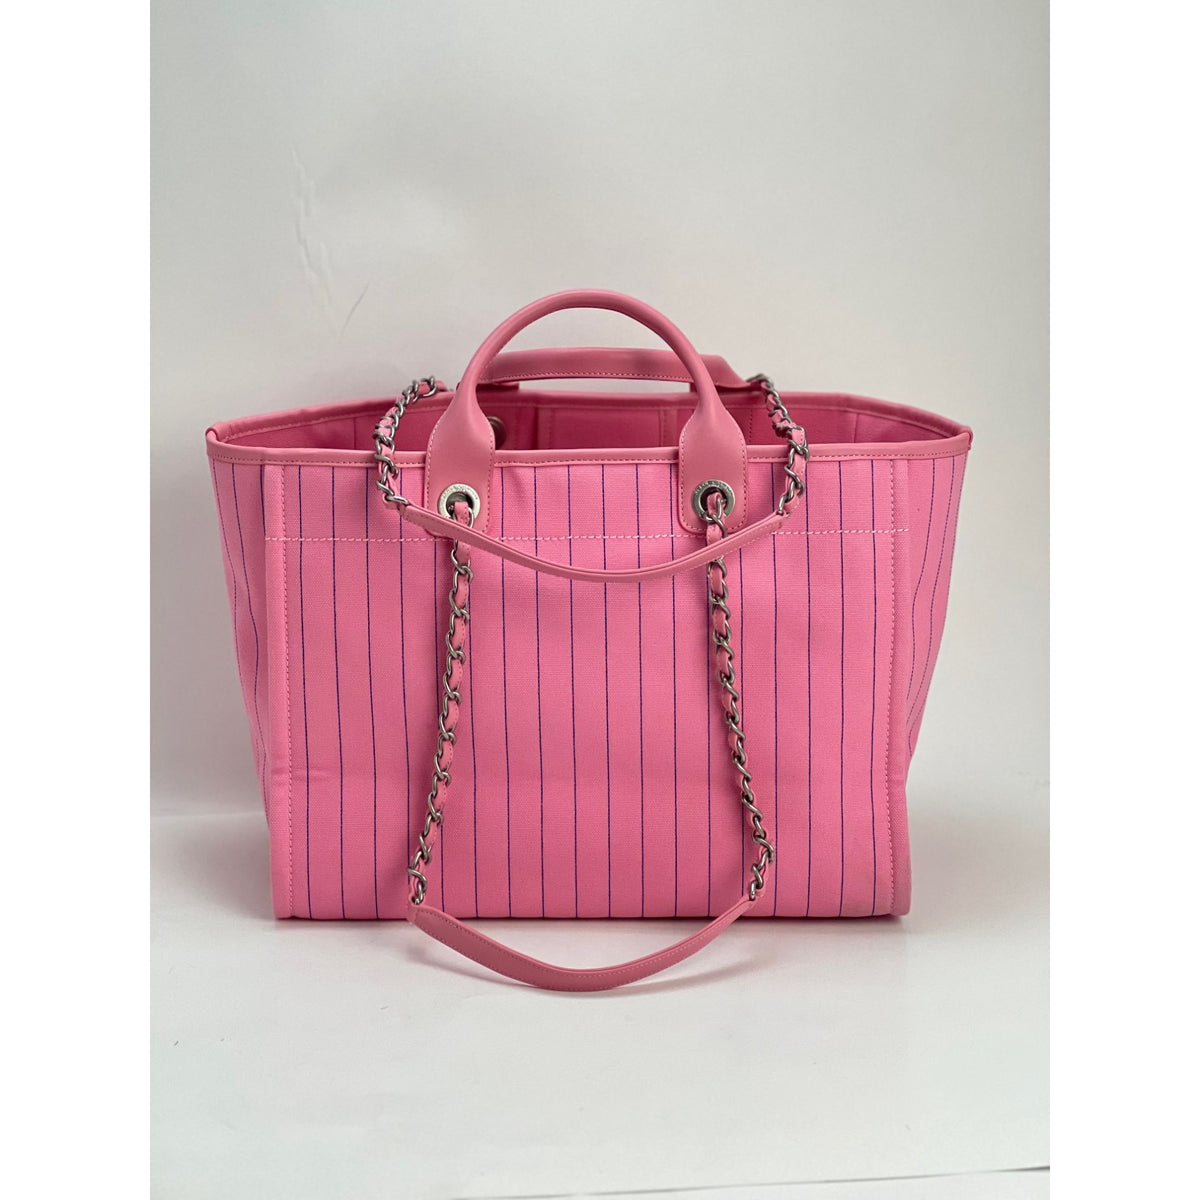 pink chanel deauville bag